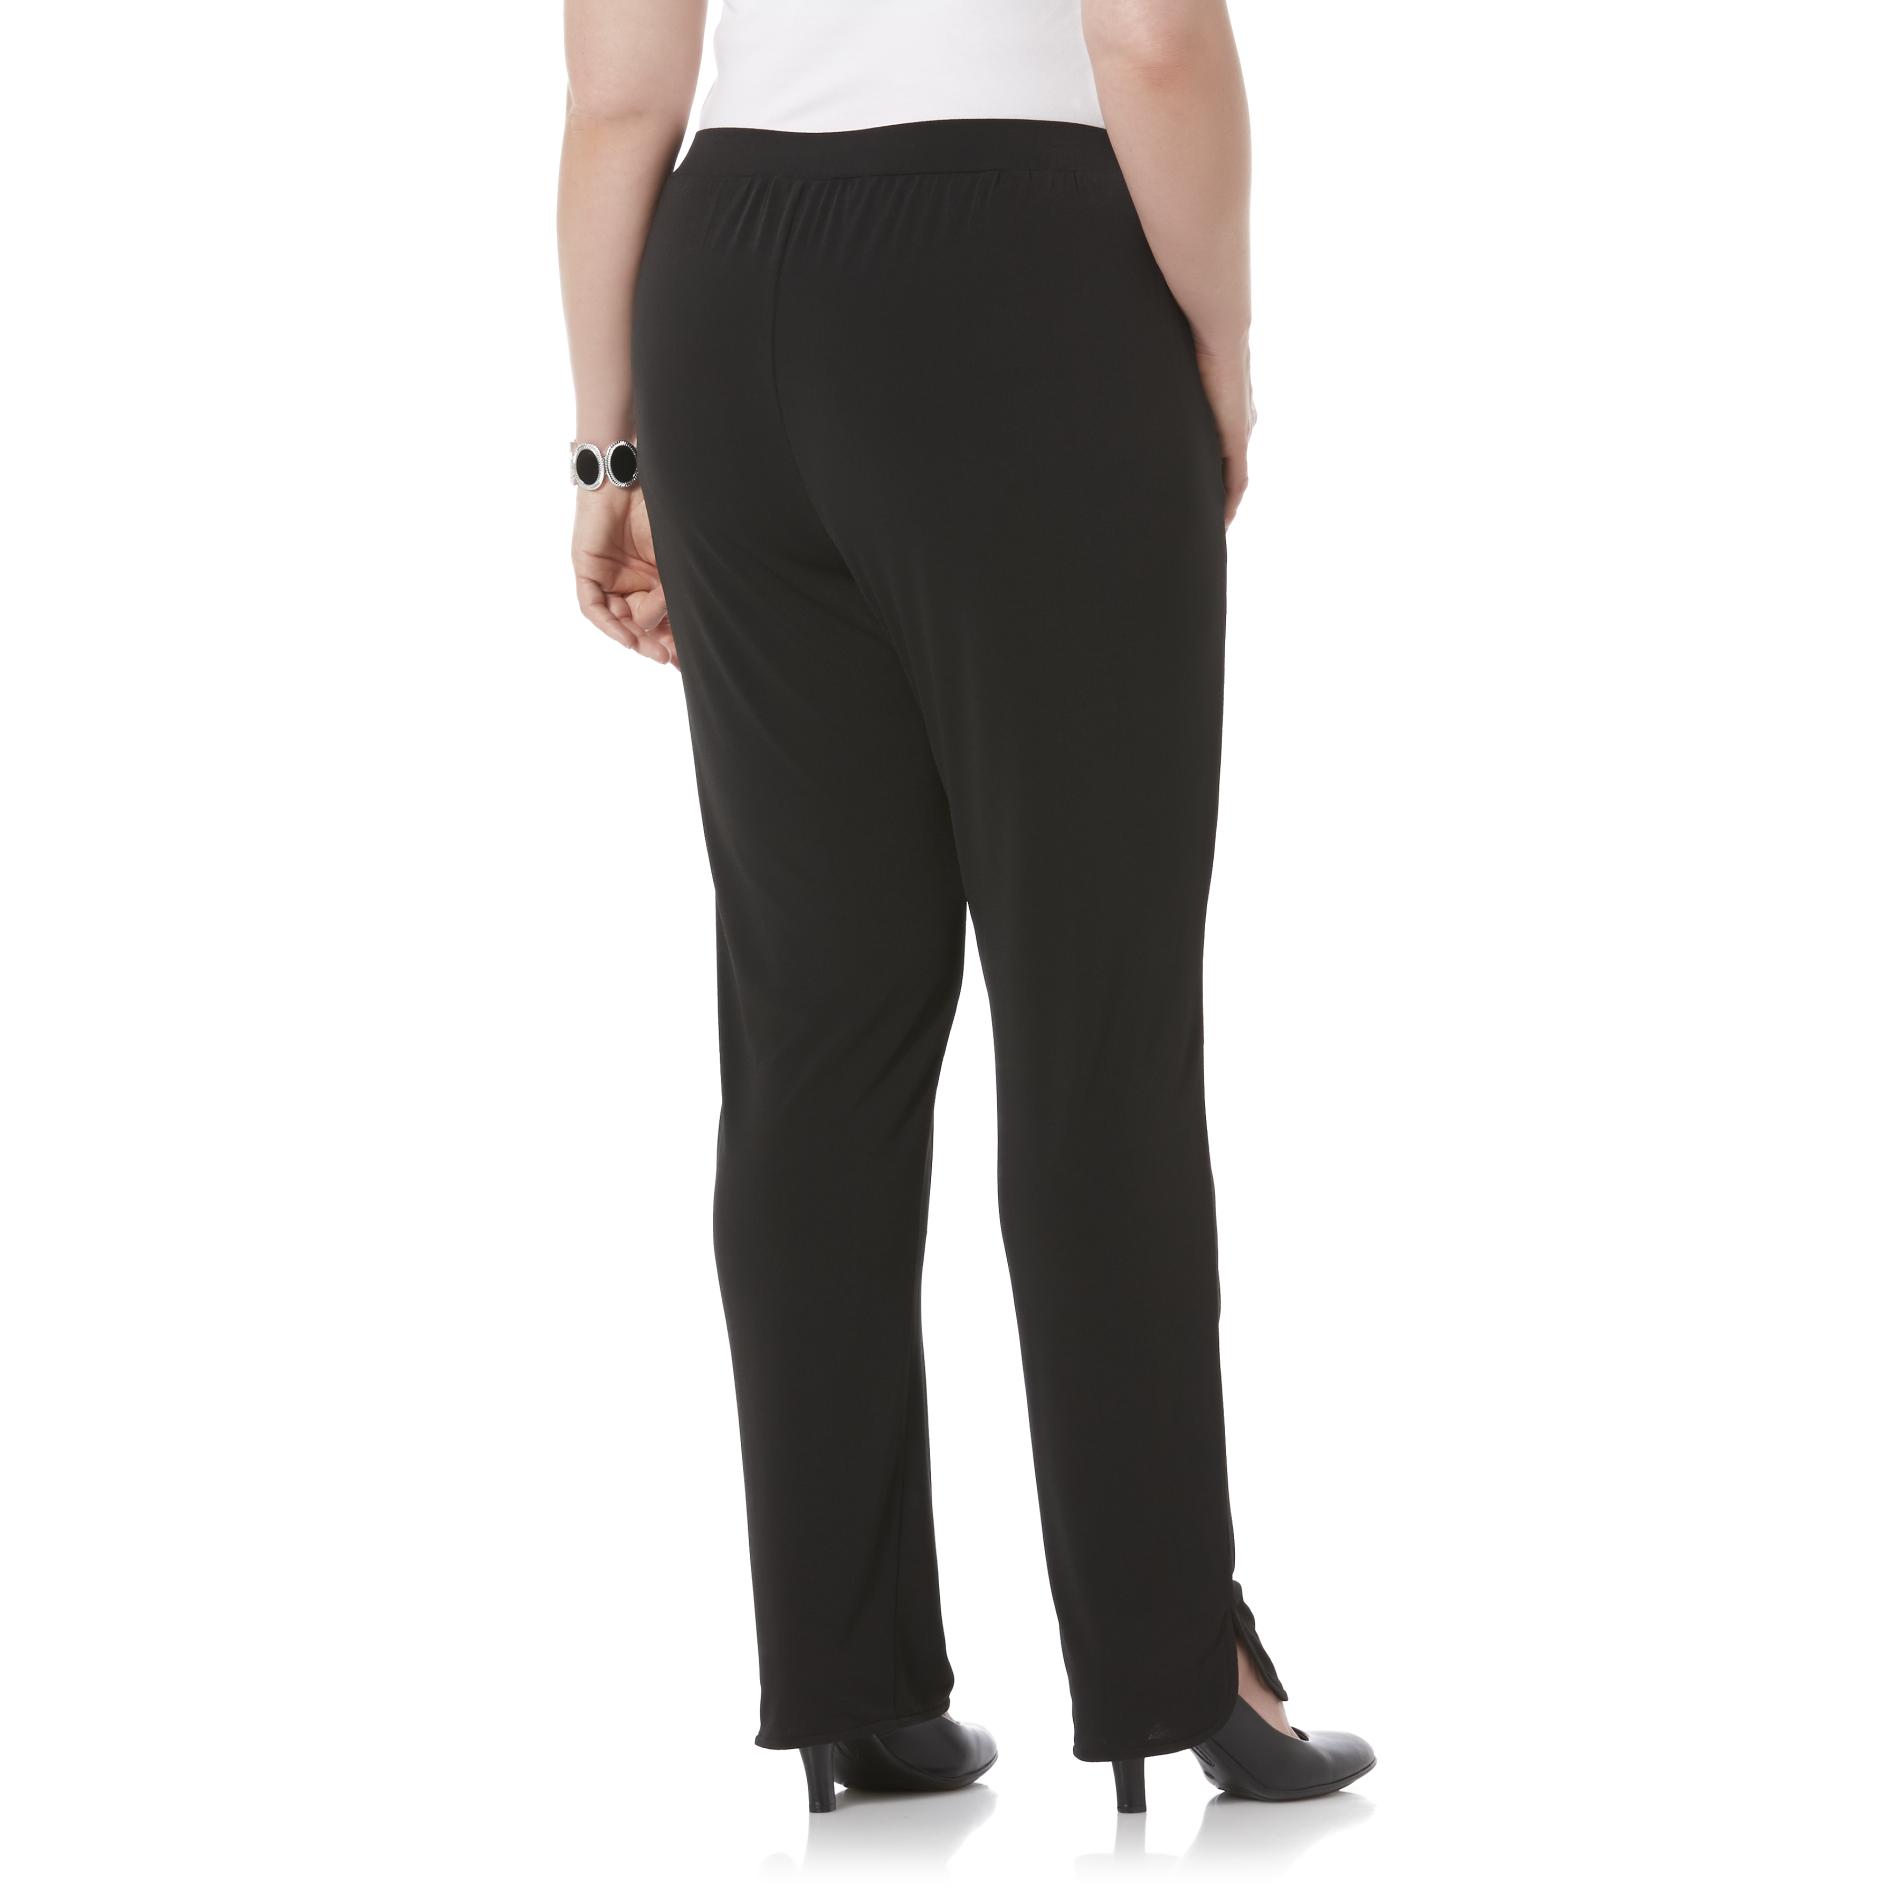 Jaclyn Smith Women's Plus Slinky Knit Pants - Clothing, Shoes & Jewelry ...